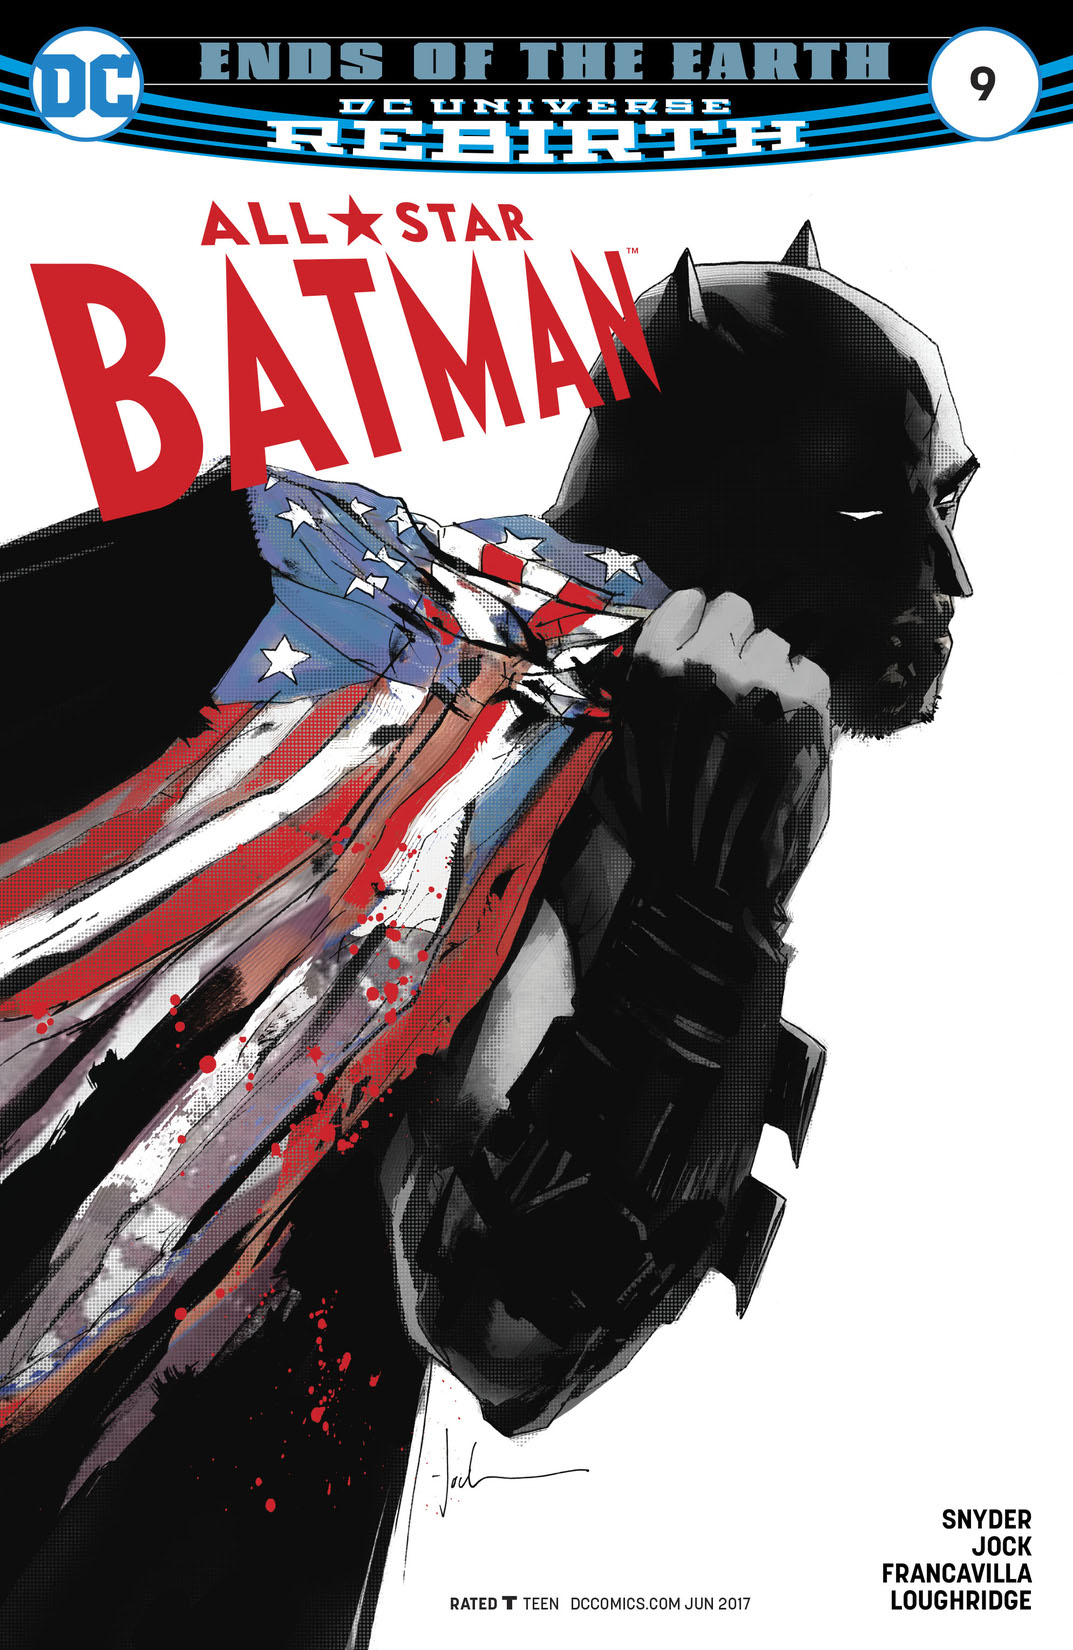 All Star Batman #9 preview images